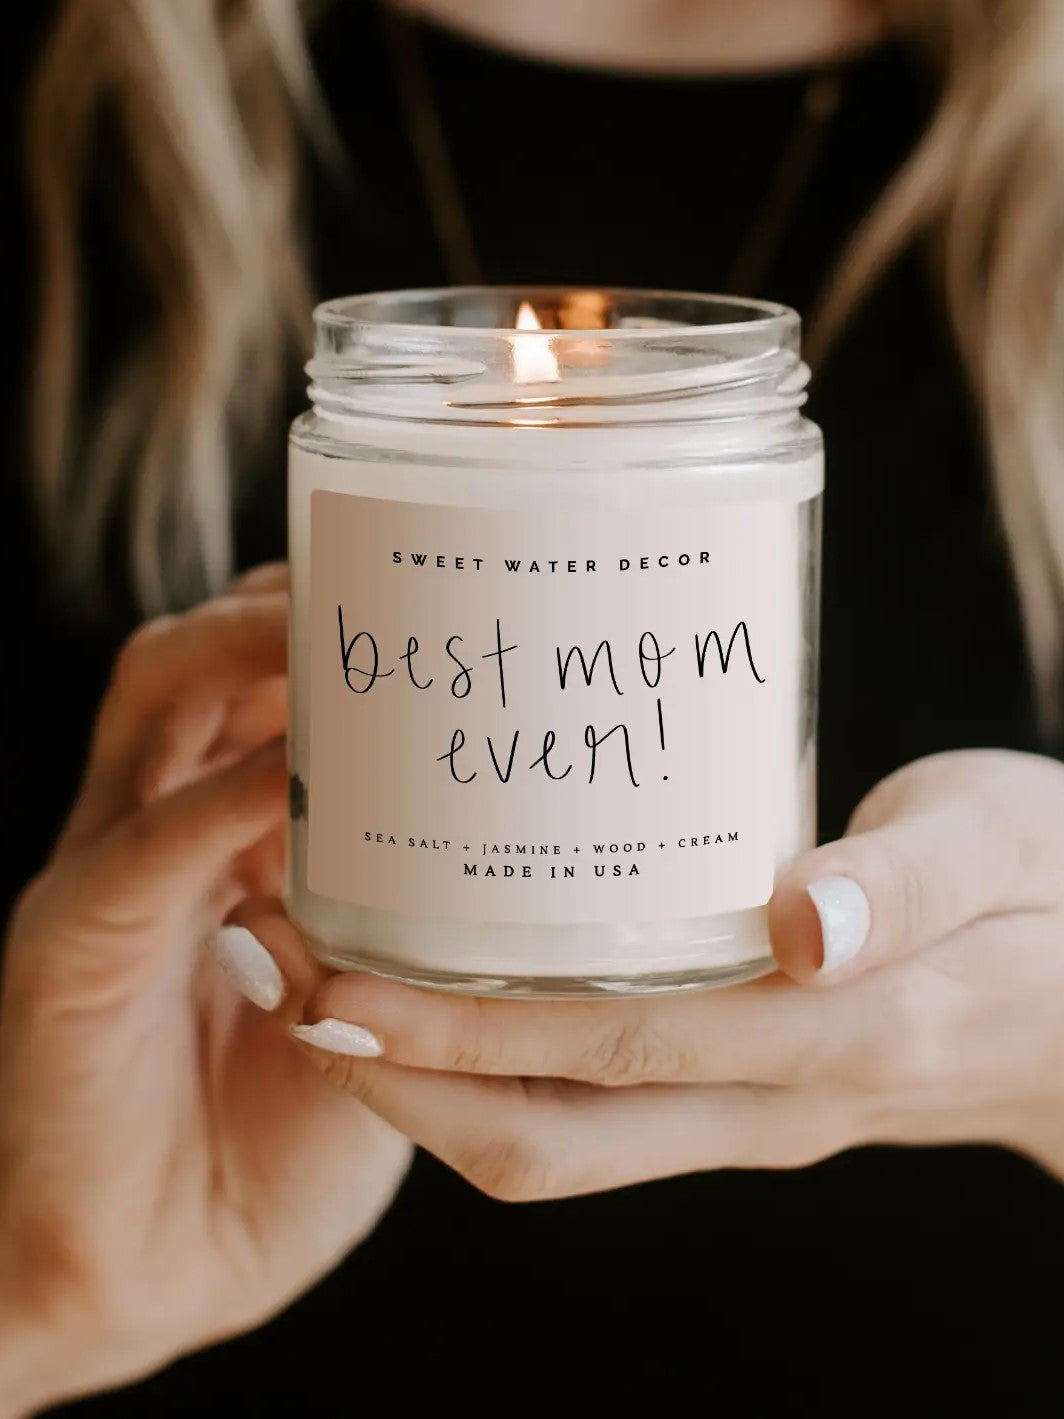 WAX & WIT Mom Candle, Gifts for Mom, Mom Gifts, Best Mom Ever